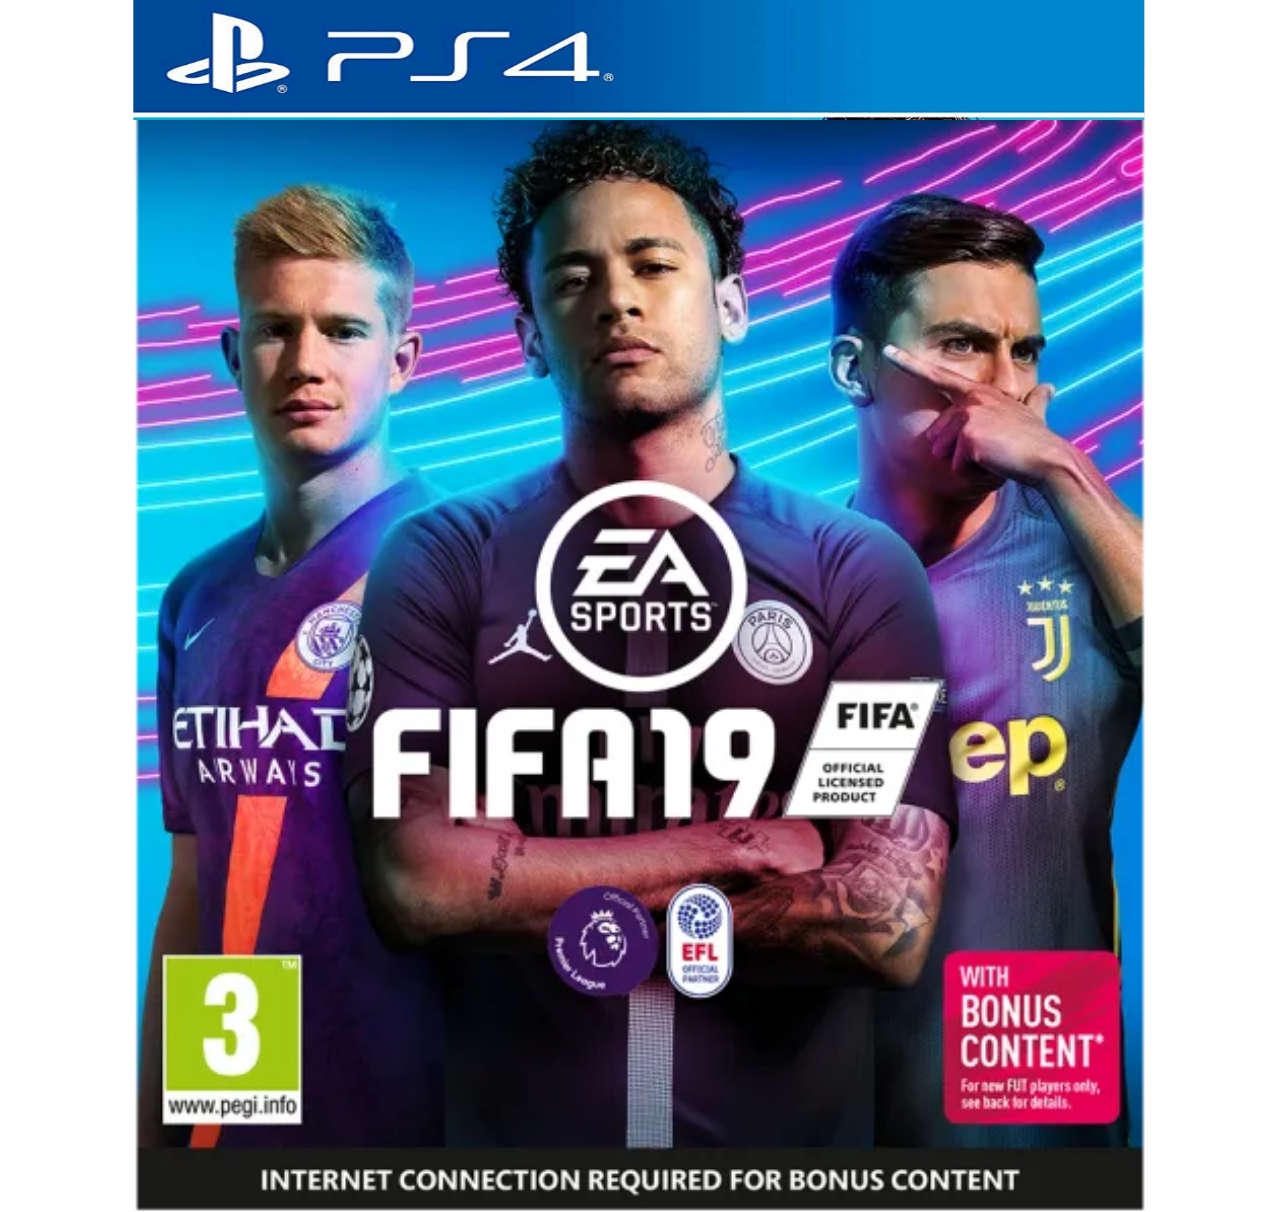 Erudipedia: Fifa 19 Gets New Updated Cover For All Platforms